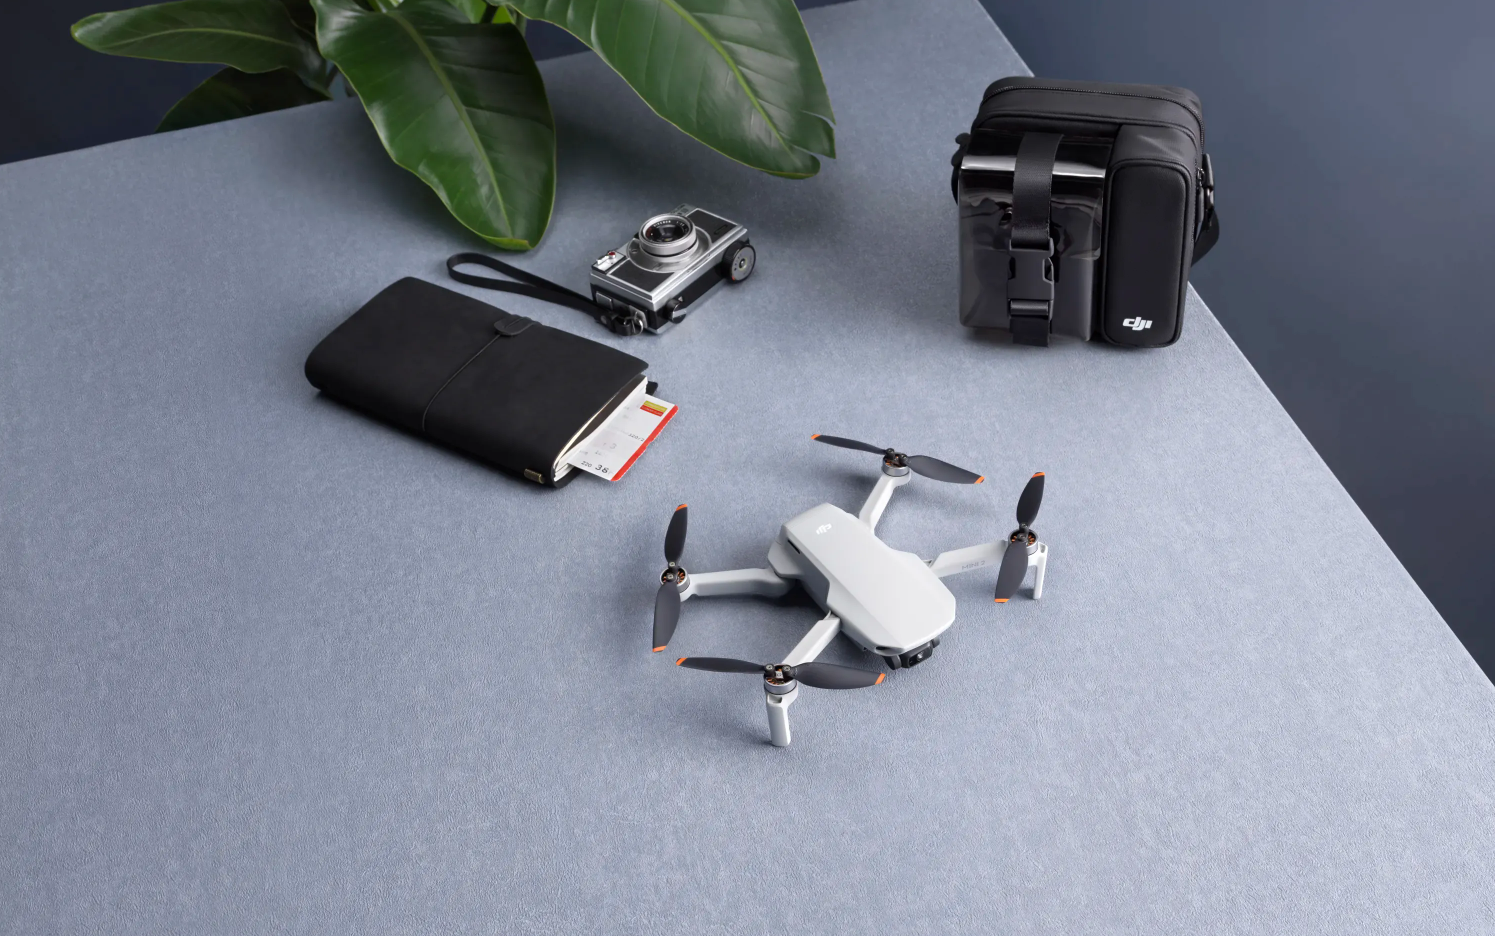 DJI Releases the Mini 2: The Best Beginner Drone Updated